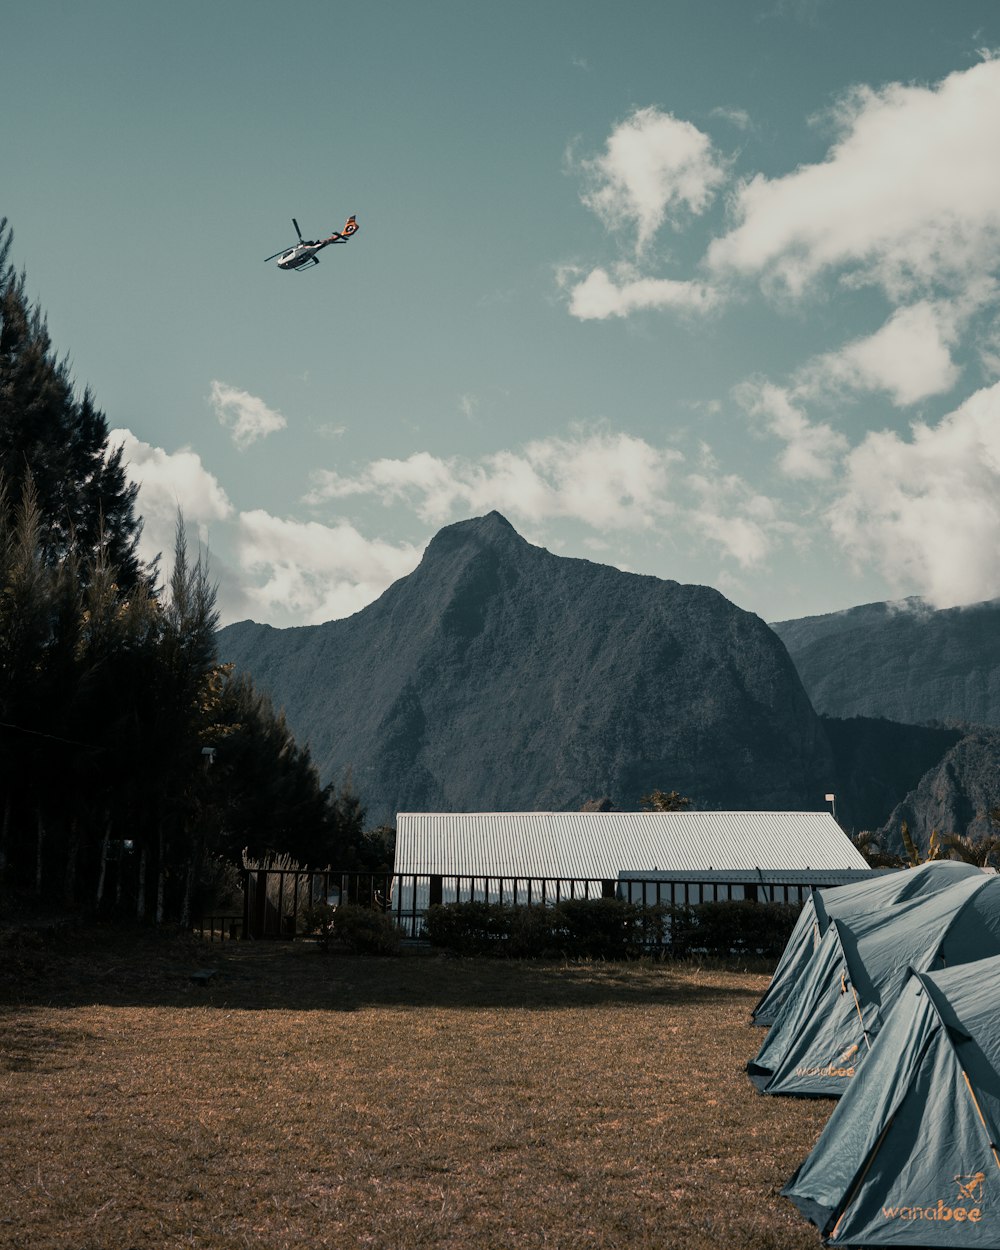 helicopter in mid air above house and mountain